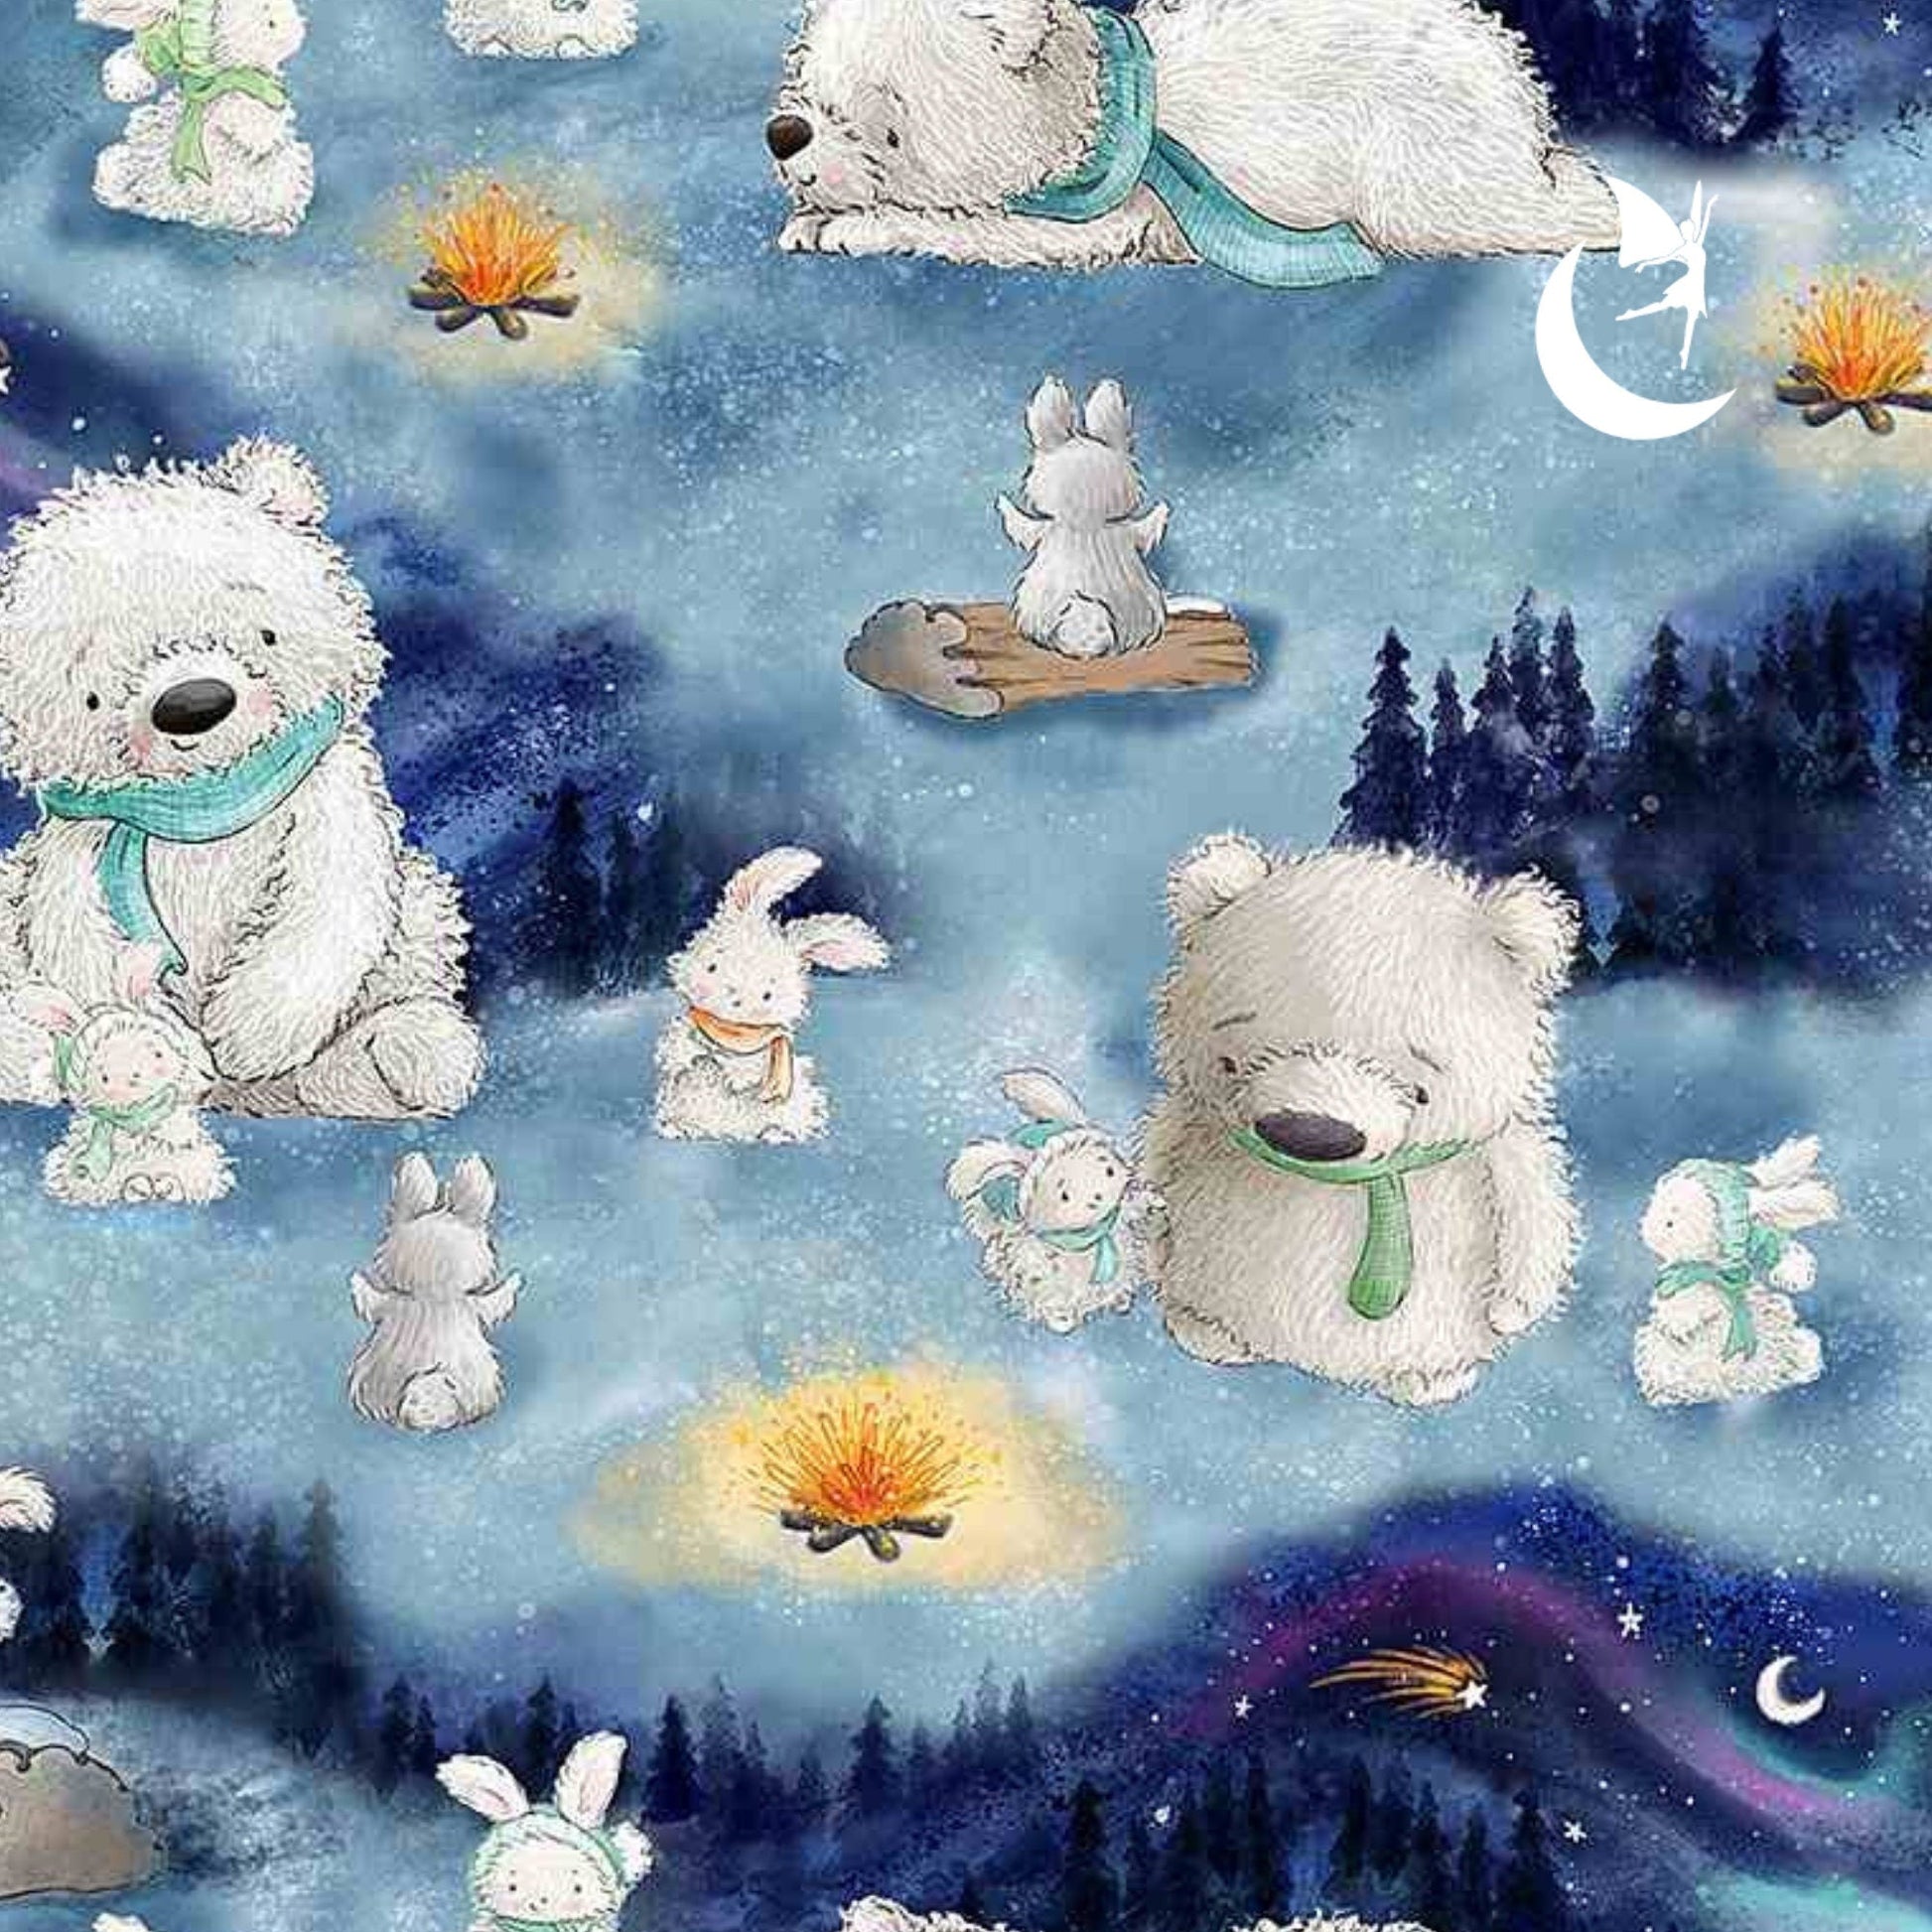 Angels Neverland Quilt Kit Arctic Nights DIY Easy Beginner QUILT KIT w/ Picture This Pattern by Jude Spero, Timeless Treasures Cotton aurora borealis Fabric